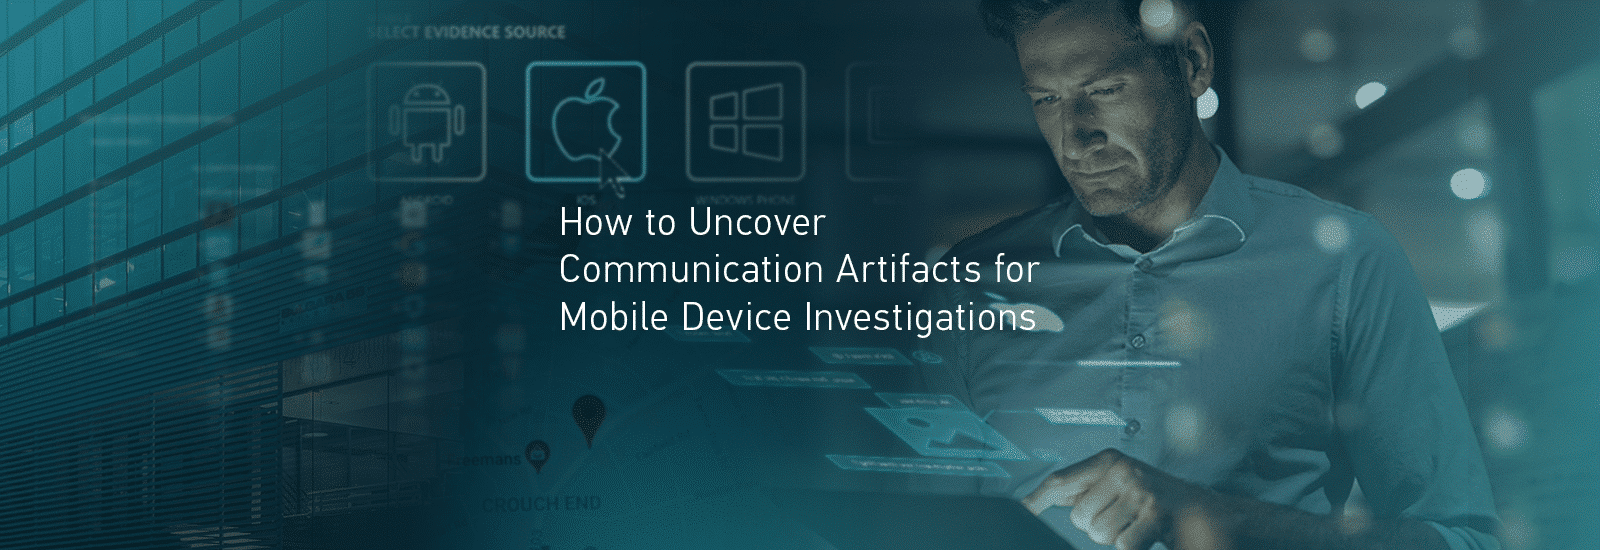 A decorative header image for the post "How to Uncover Communication Artifacts for Mobile Device Investigations".